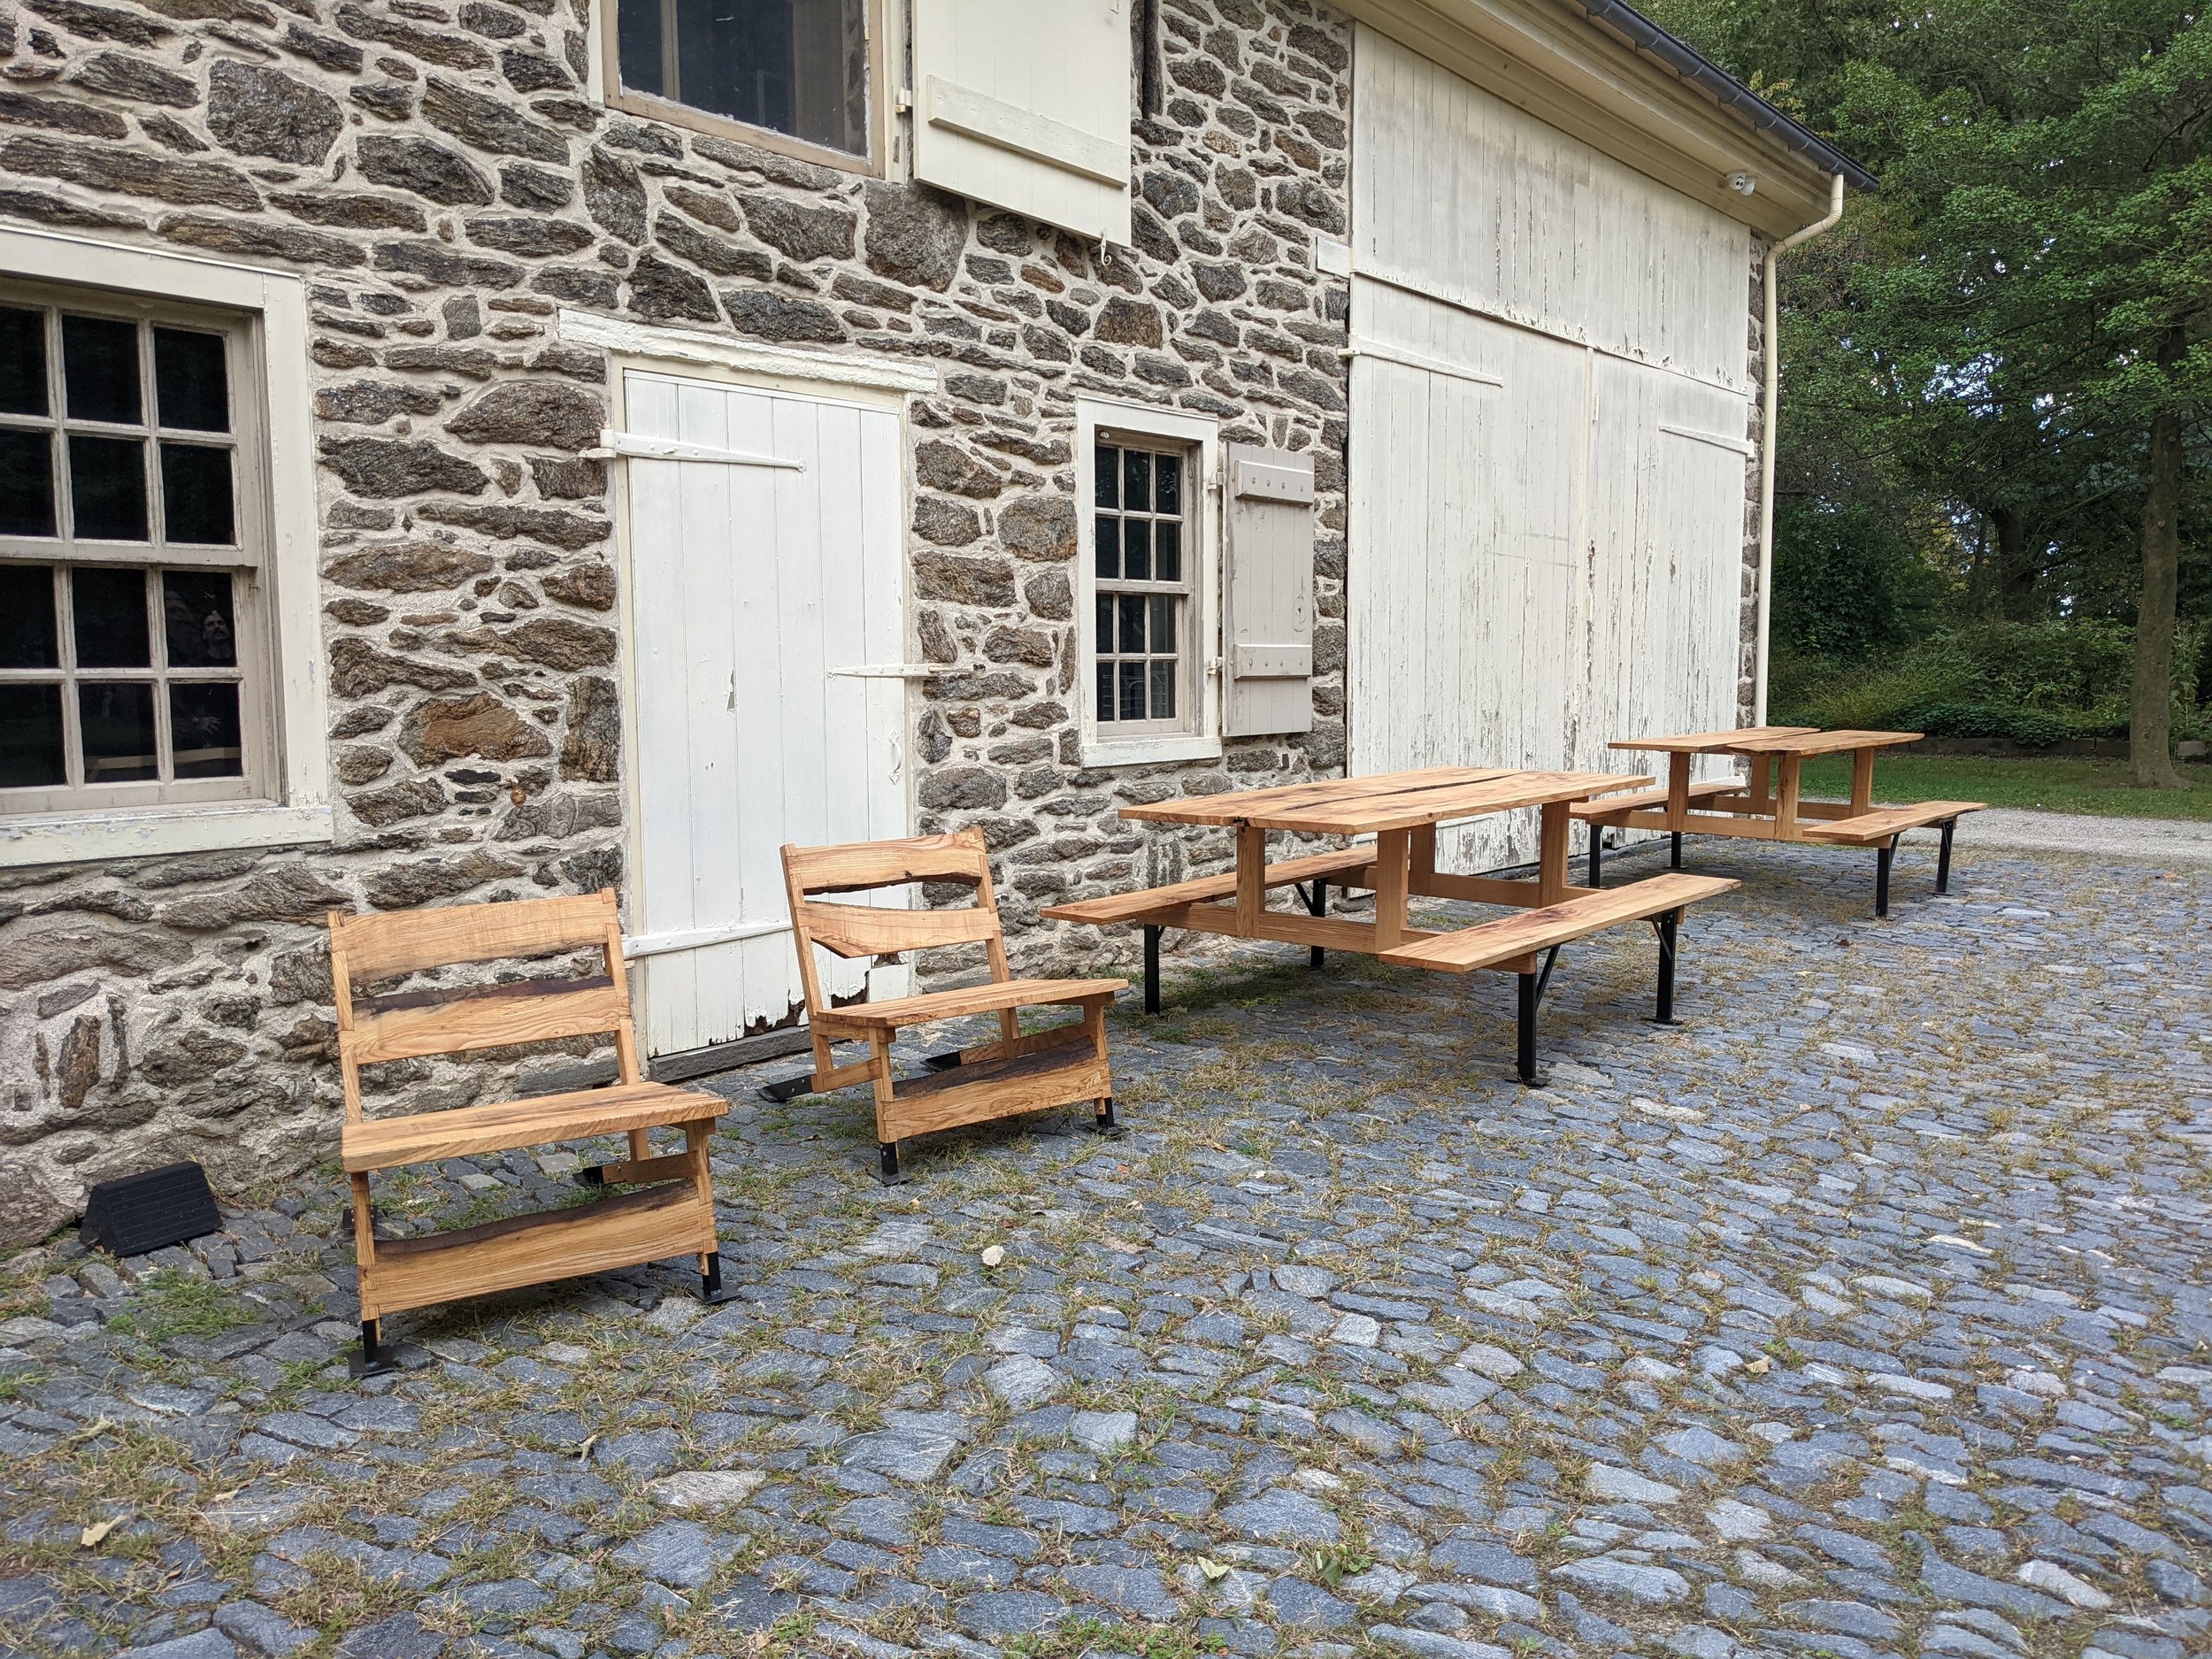  ash outdoor furniture set for the Historic Cliveden House in Germantown, Philadelphia 